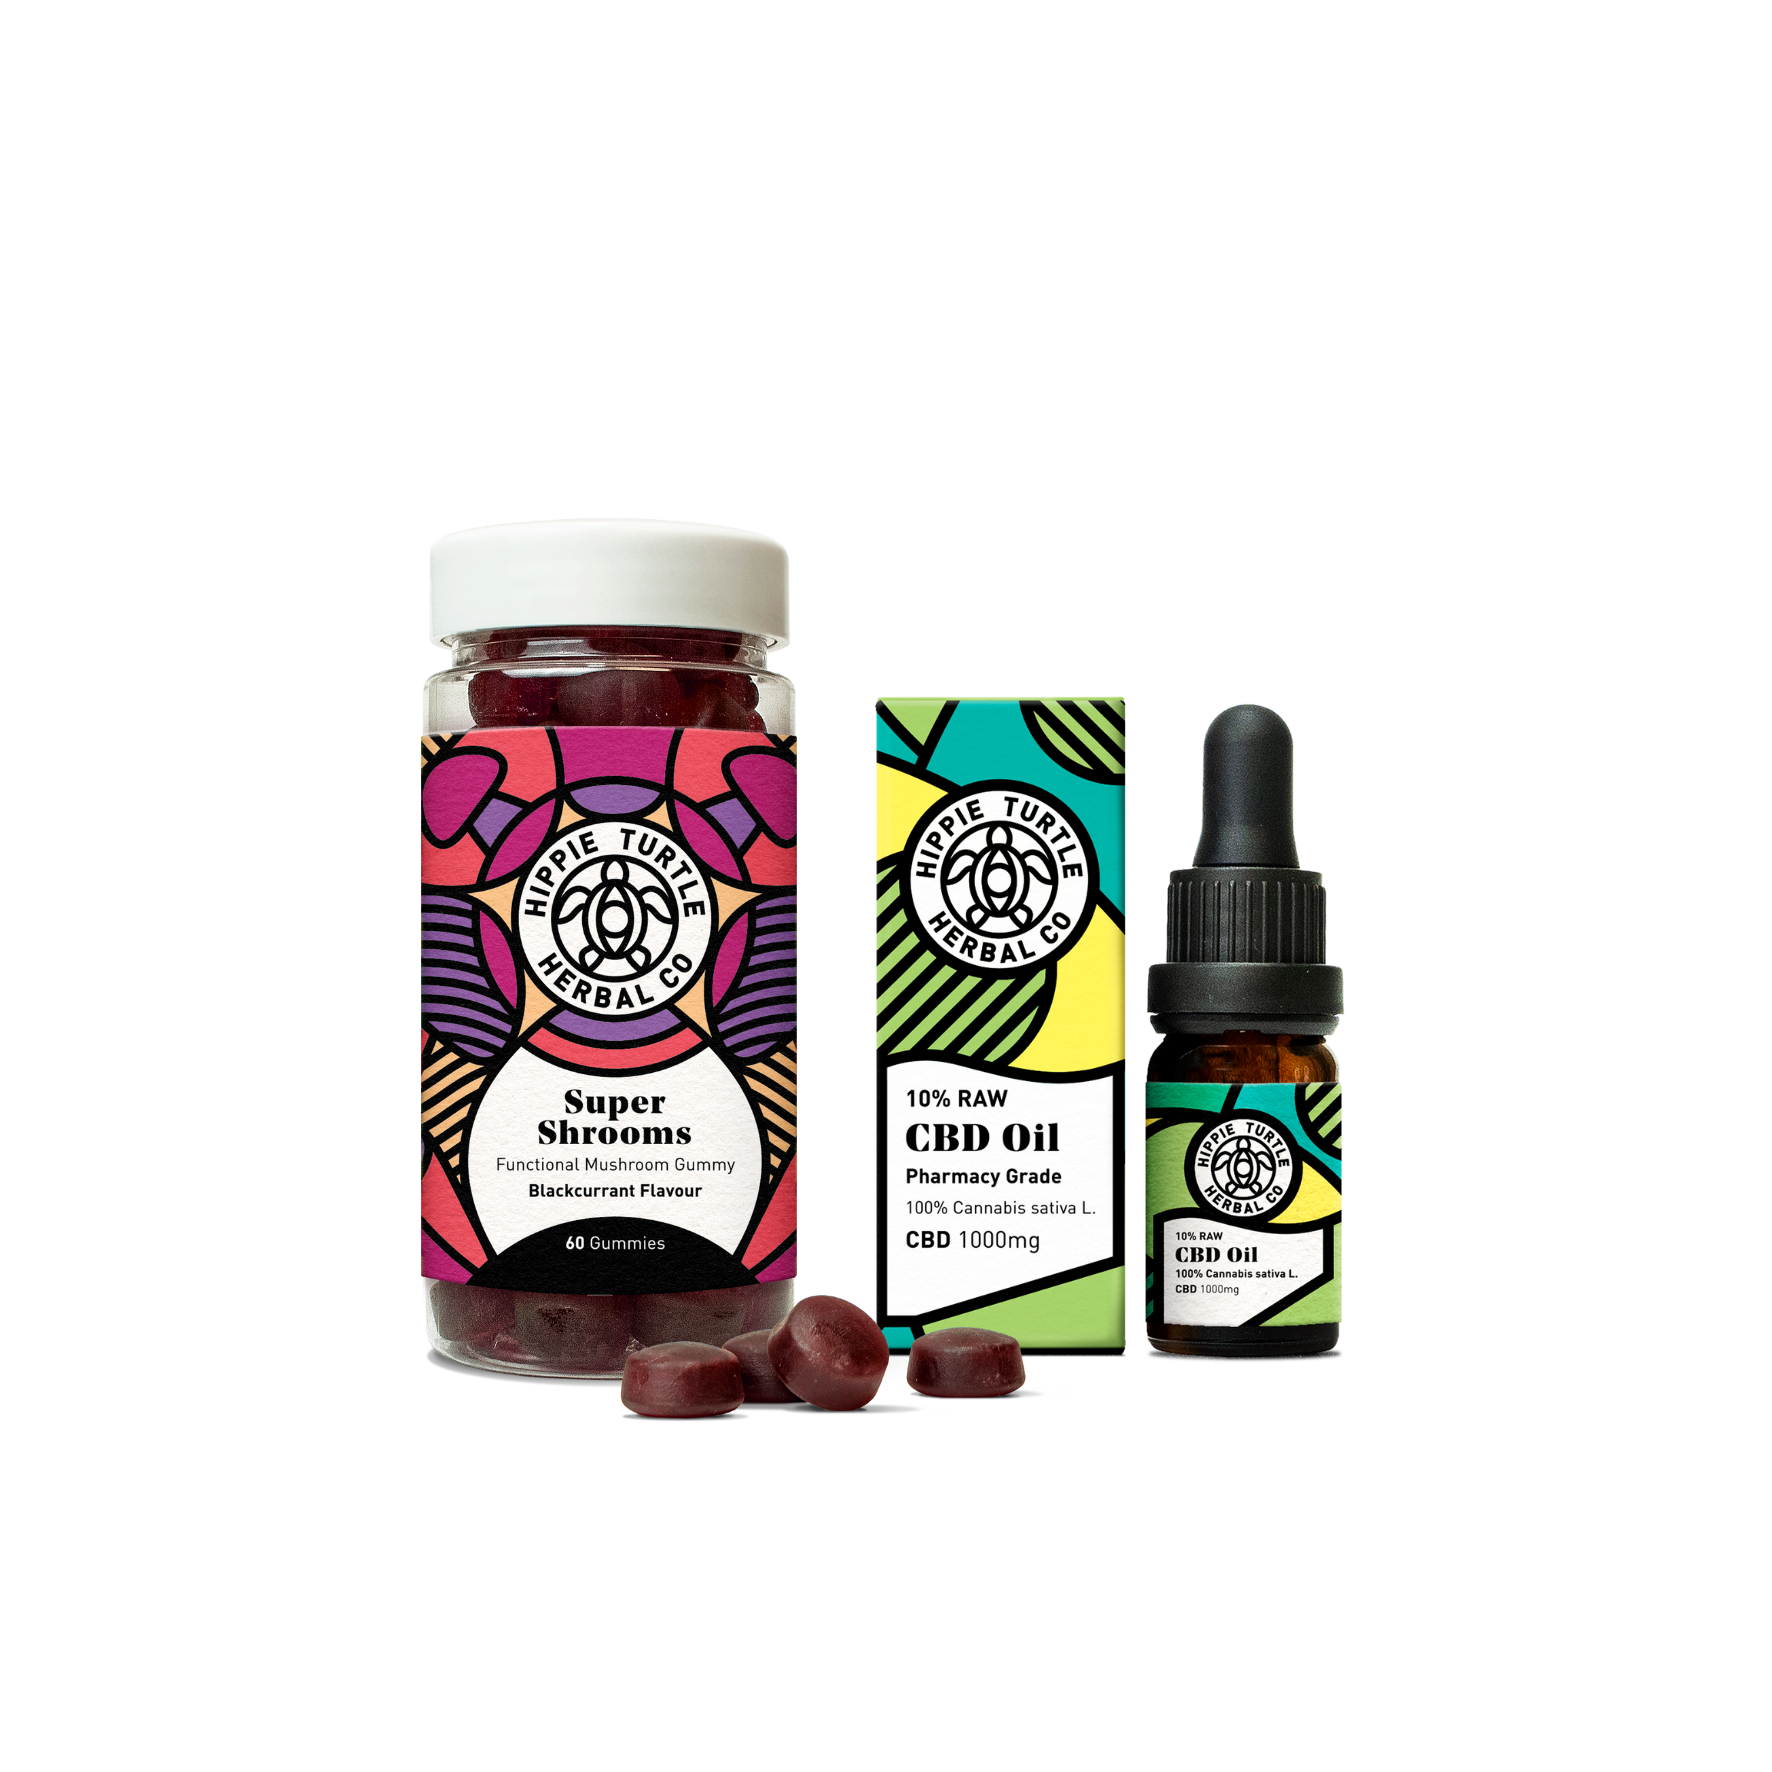 Harmony combo containing a bundle ofsuper shrooms functional mushroom gummies with ginseng & b5, and premium pharmacy grade RAW 10% cbd oil 